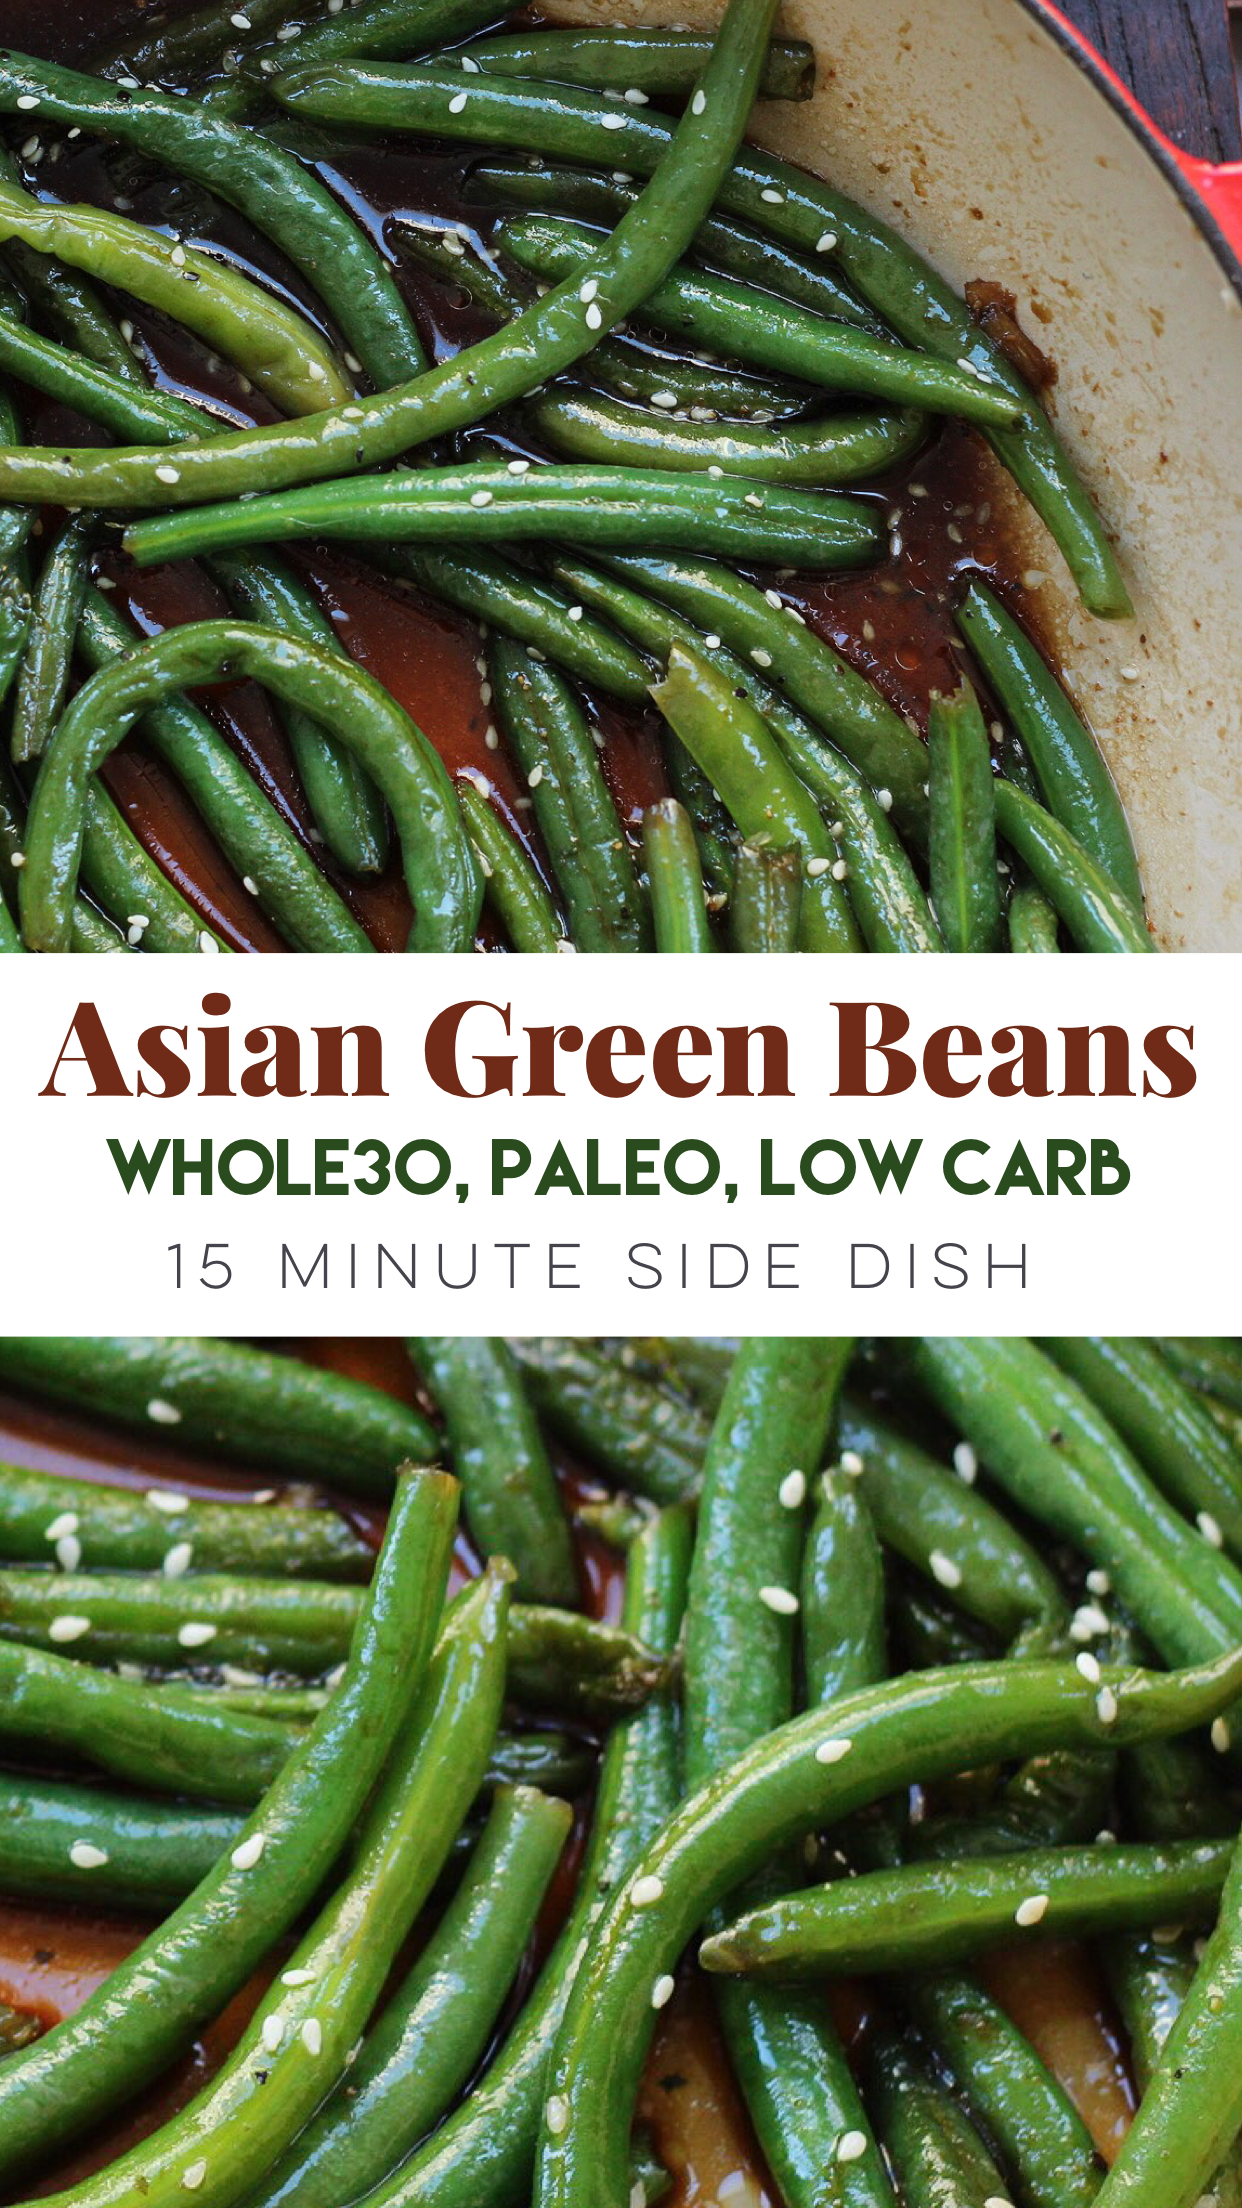 Simple but tasty vegetable side dish! These Whole30 green beans are an easy paleo side dish to go with any meal, and a family friendly vegetable recipe! #paleo #lowcarb #whole30 #greenbeans #paleosidedish via @paleobailey